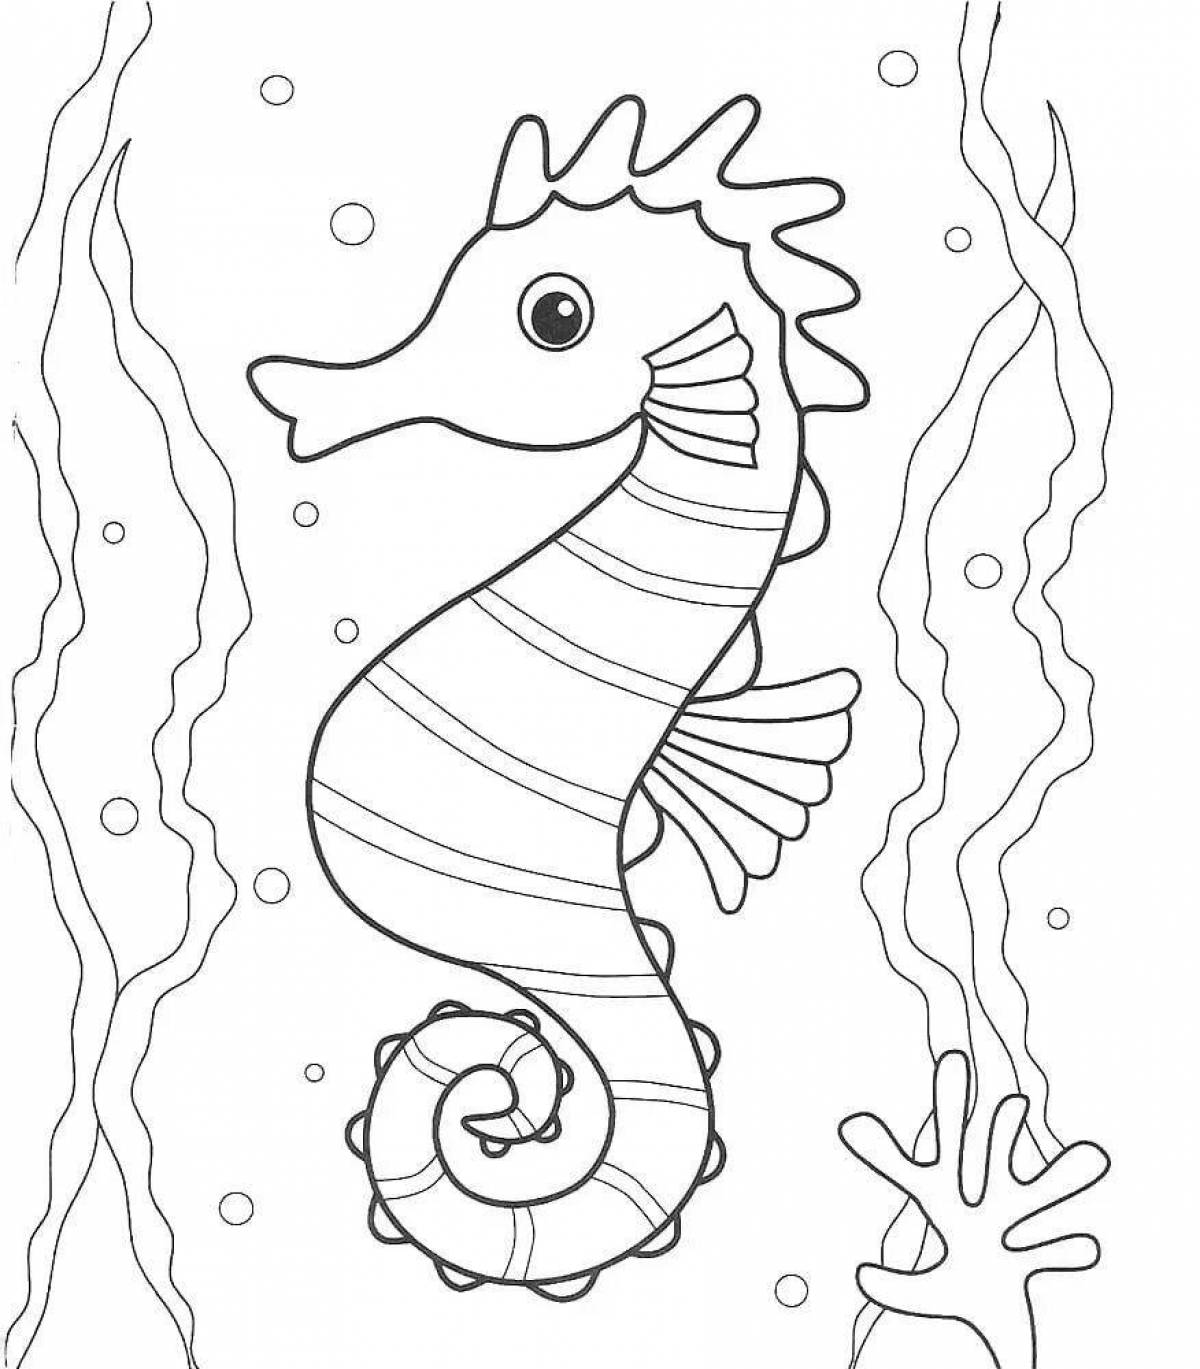 Fun coloring pages inhabitants of the seas and oceans for children